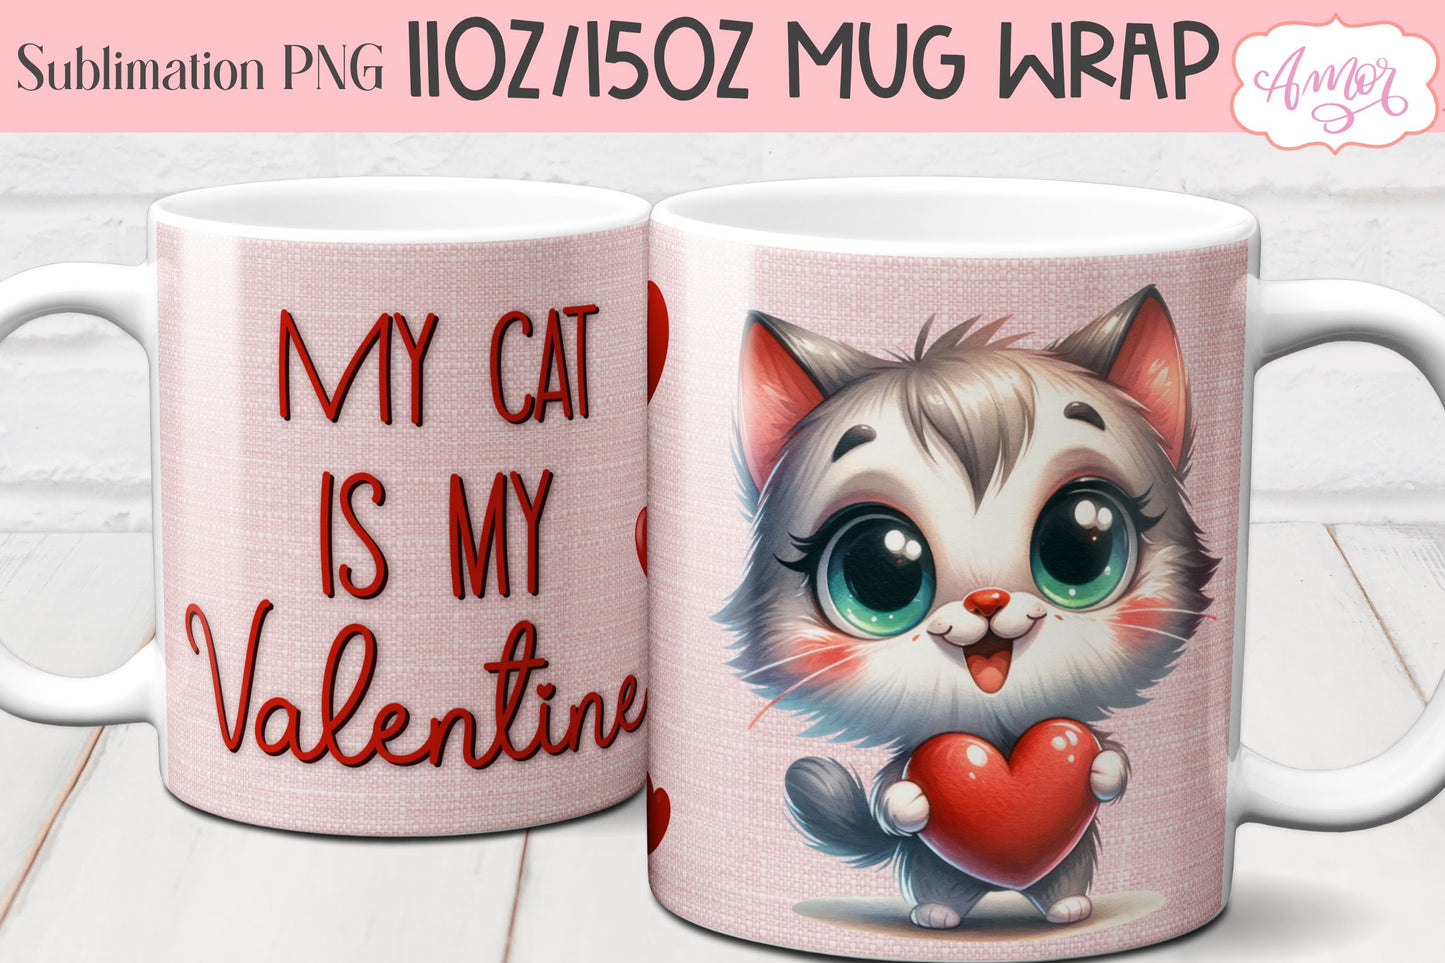 My cat is my valentine mug Wrap PNG for Sublimation